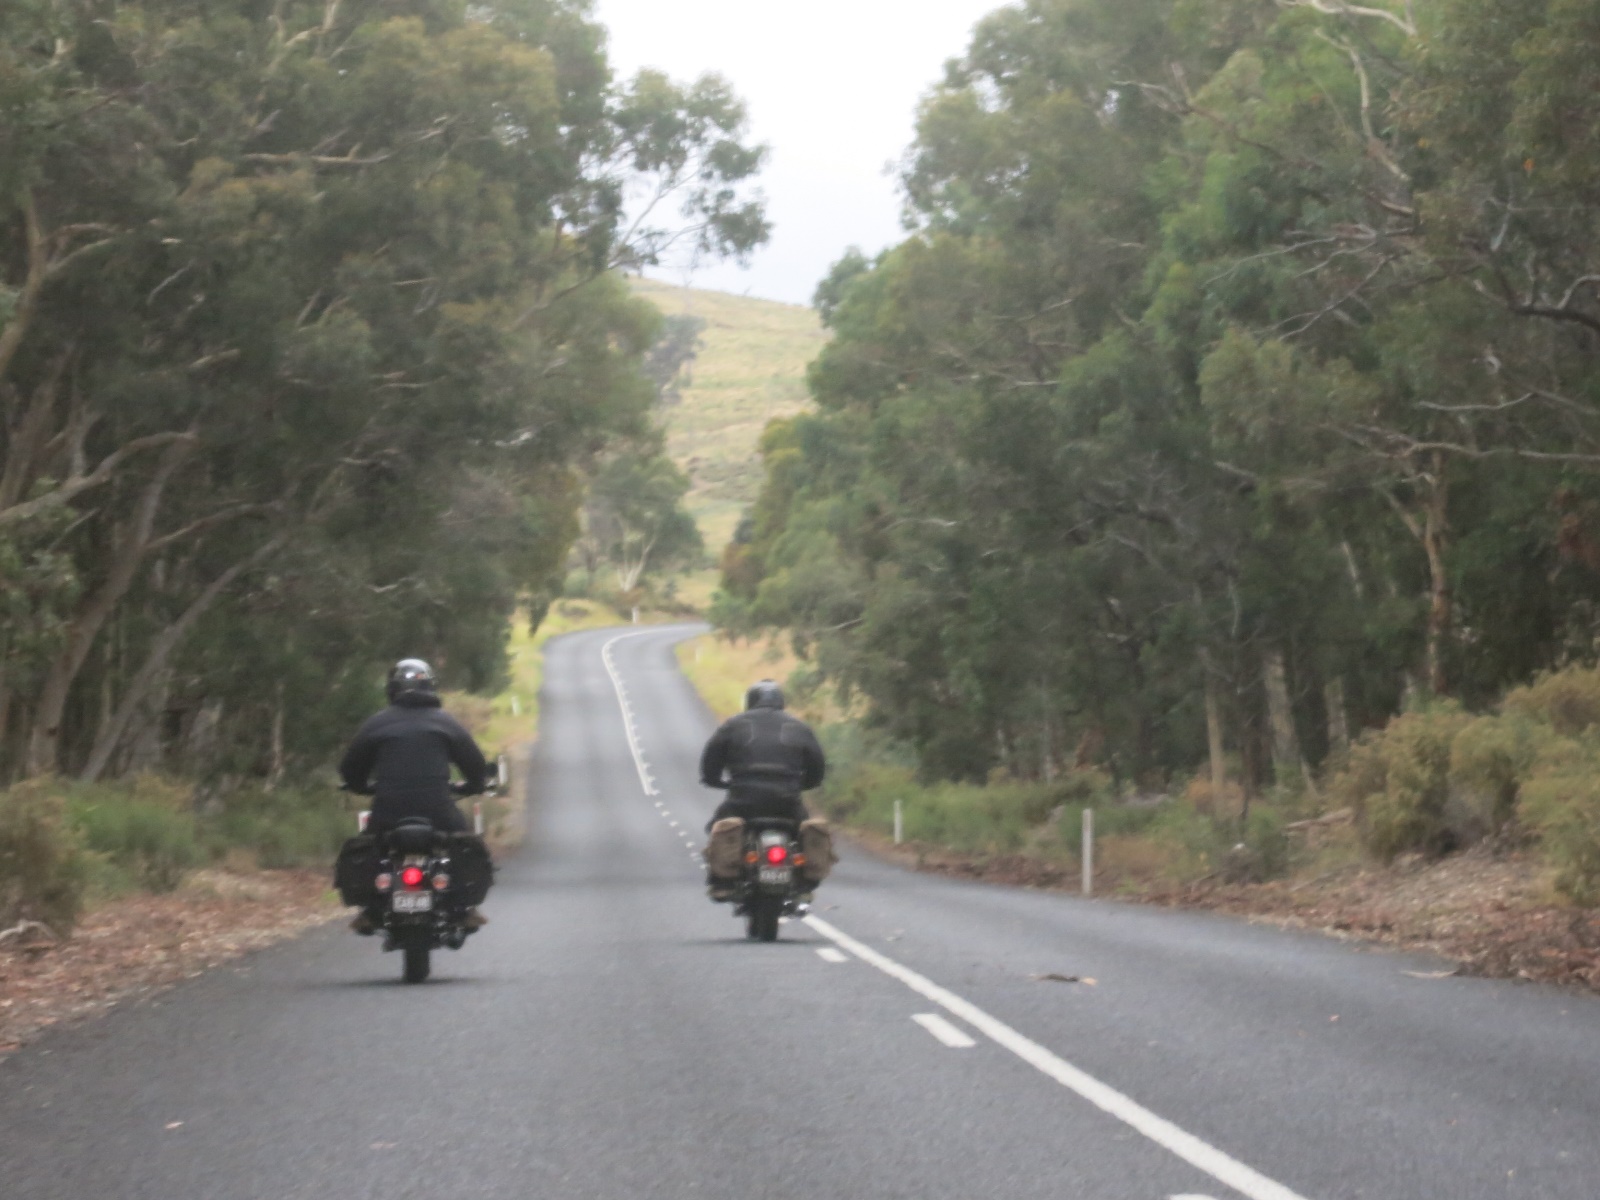 A couple of people ride motorcycles down a road

Description automatically generated with low confidence